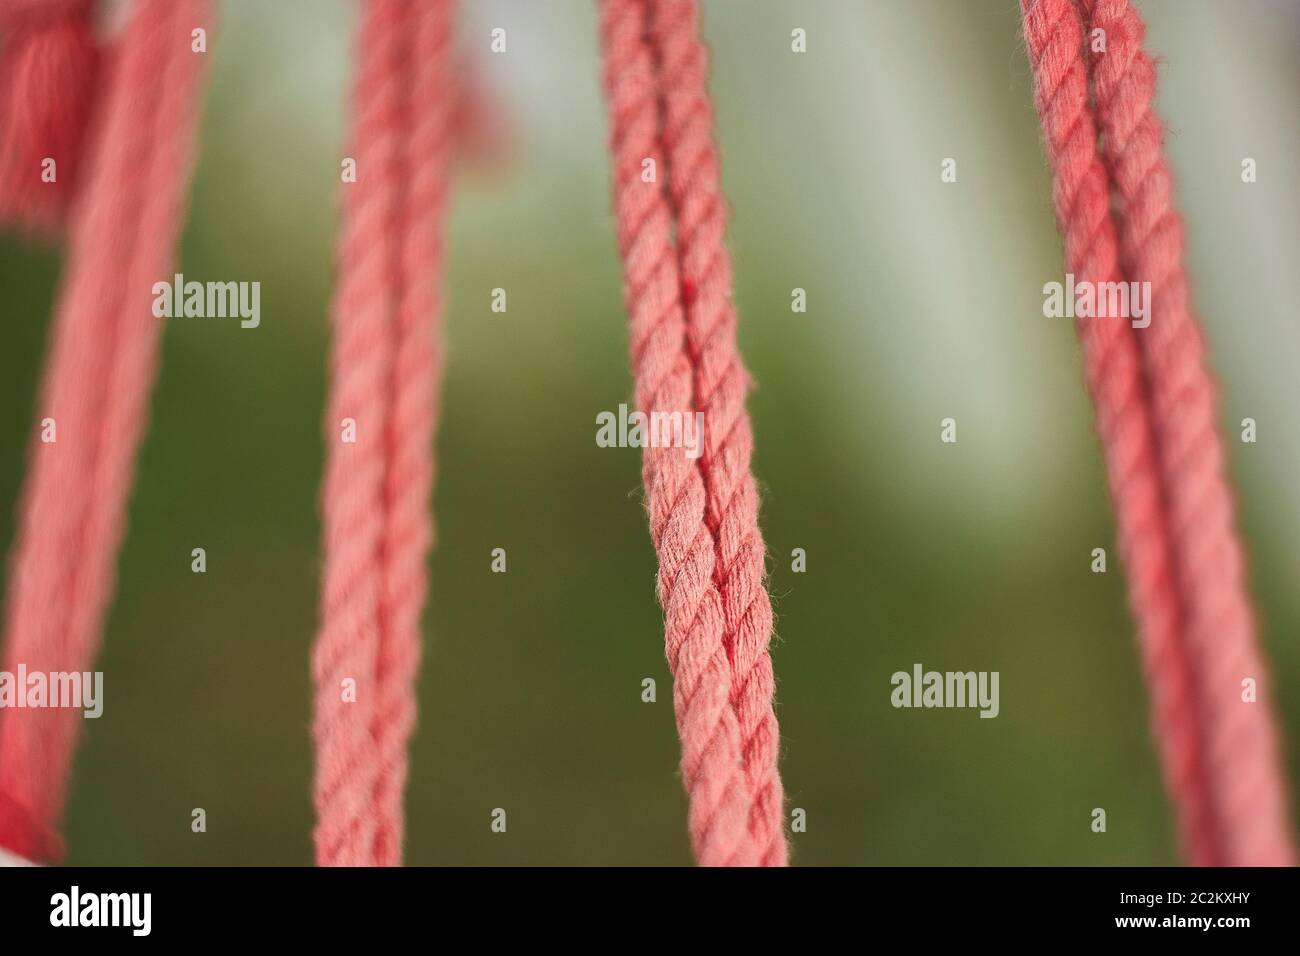 Macro shot detail of a trailing rope ready to hold its weight. Horizontal shooting. Stock Photo